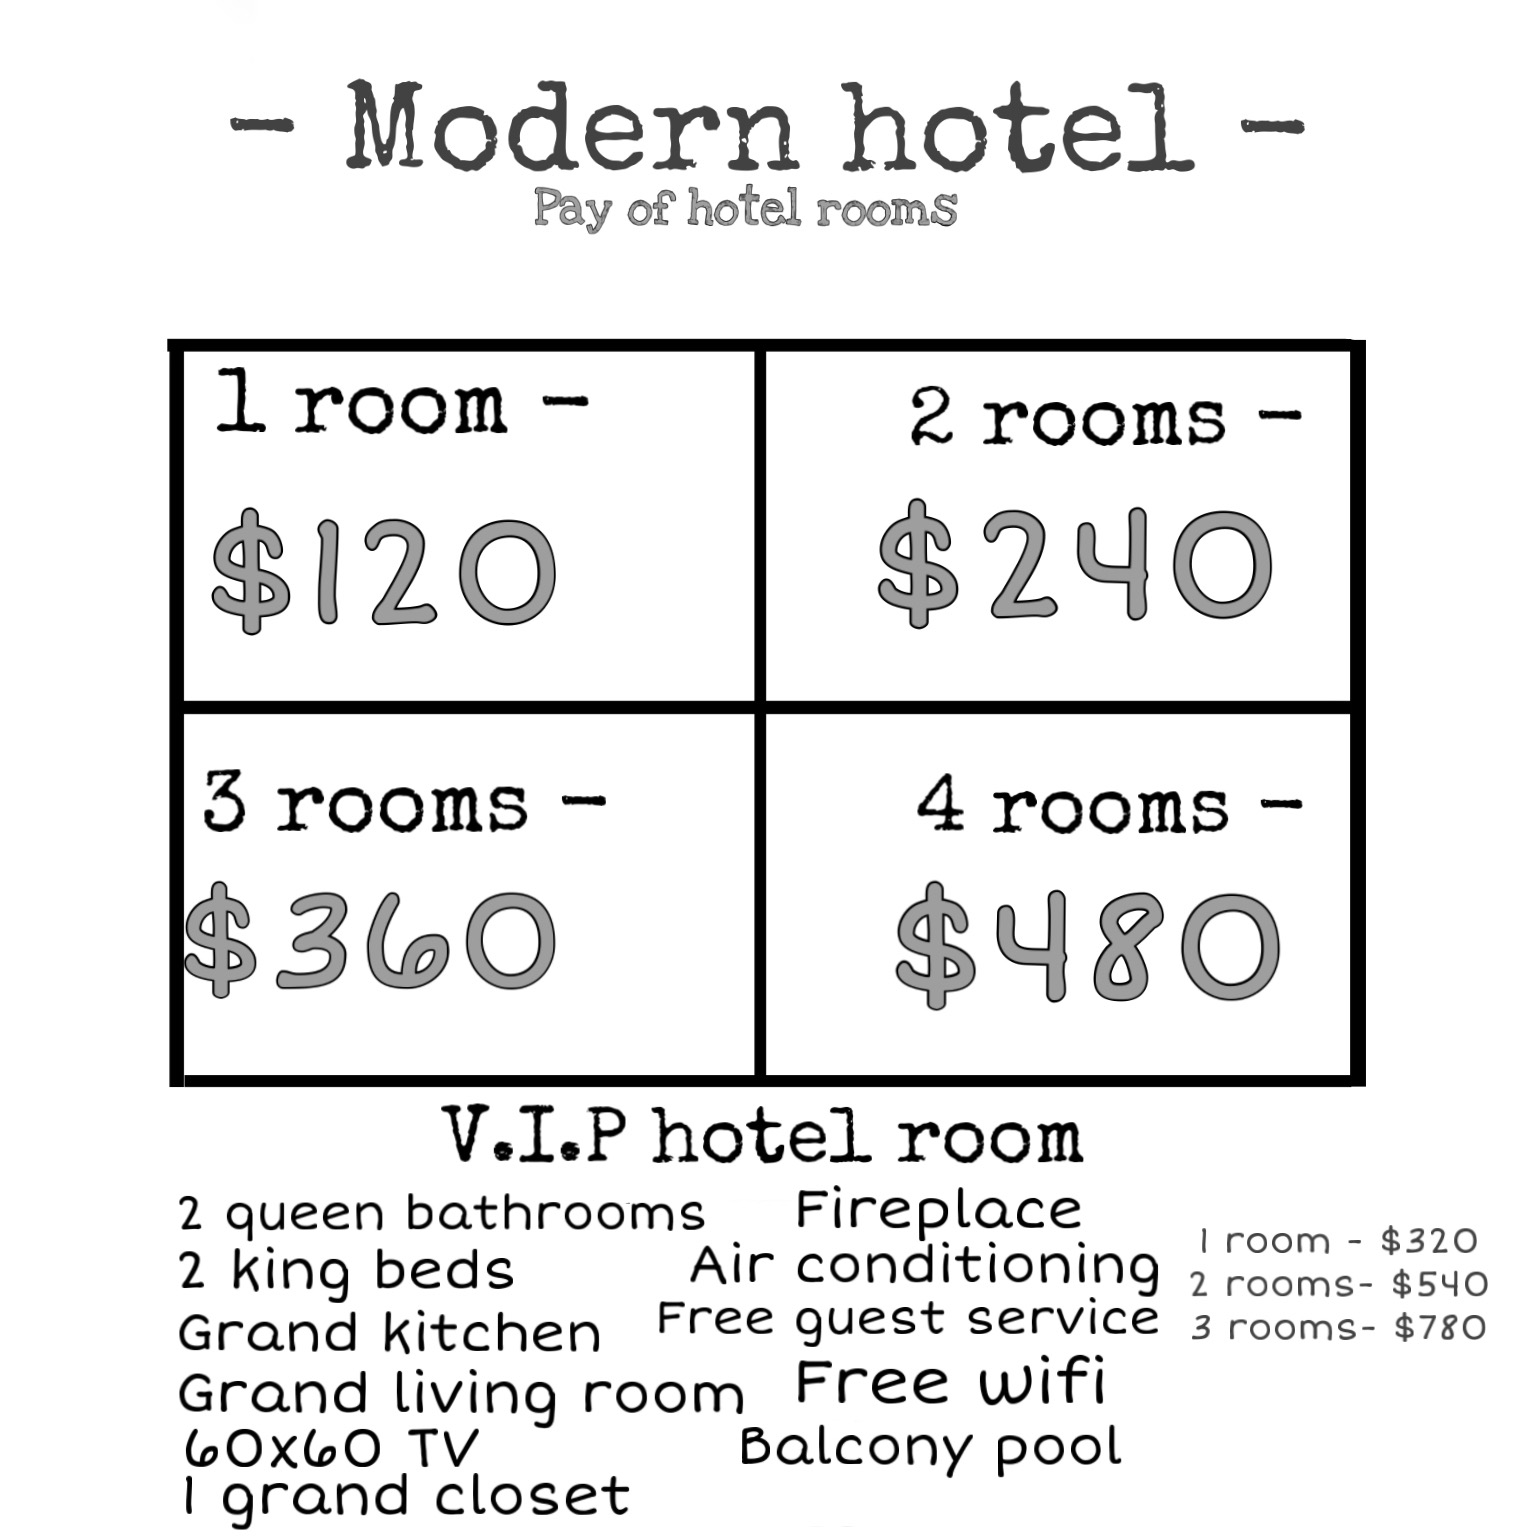 Roblox Hotel Modern Rooms Image By Bloxburg Decals